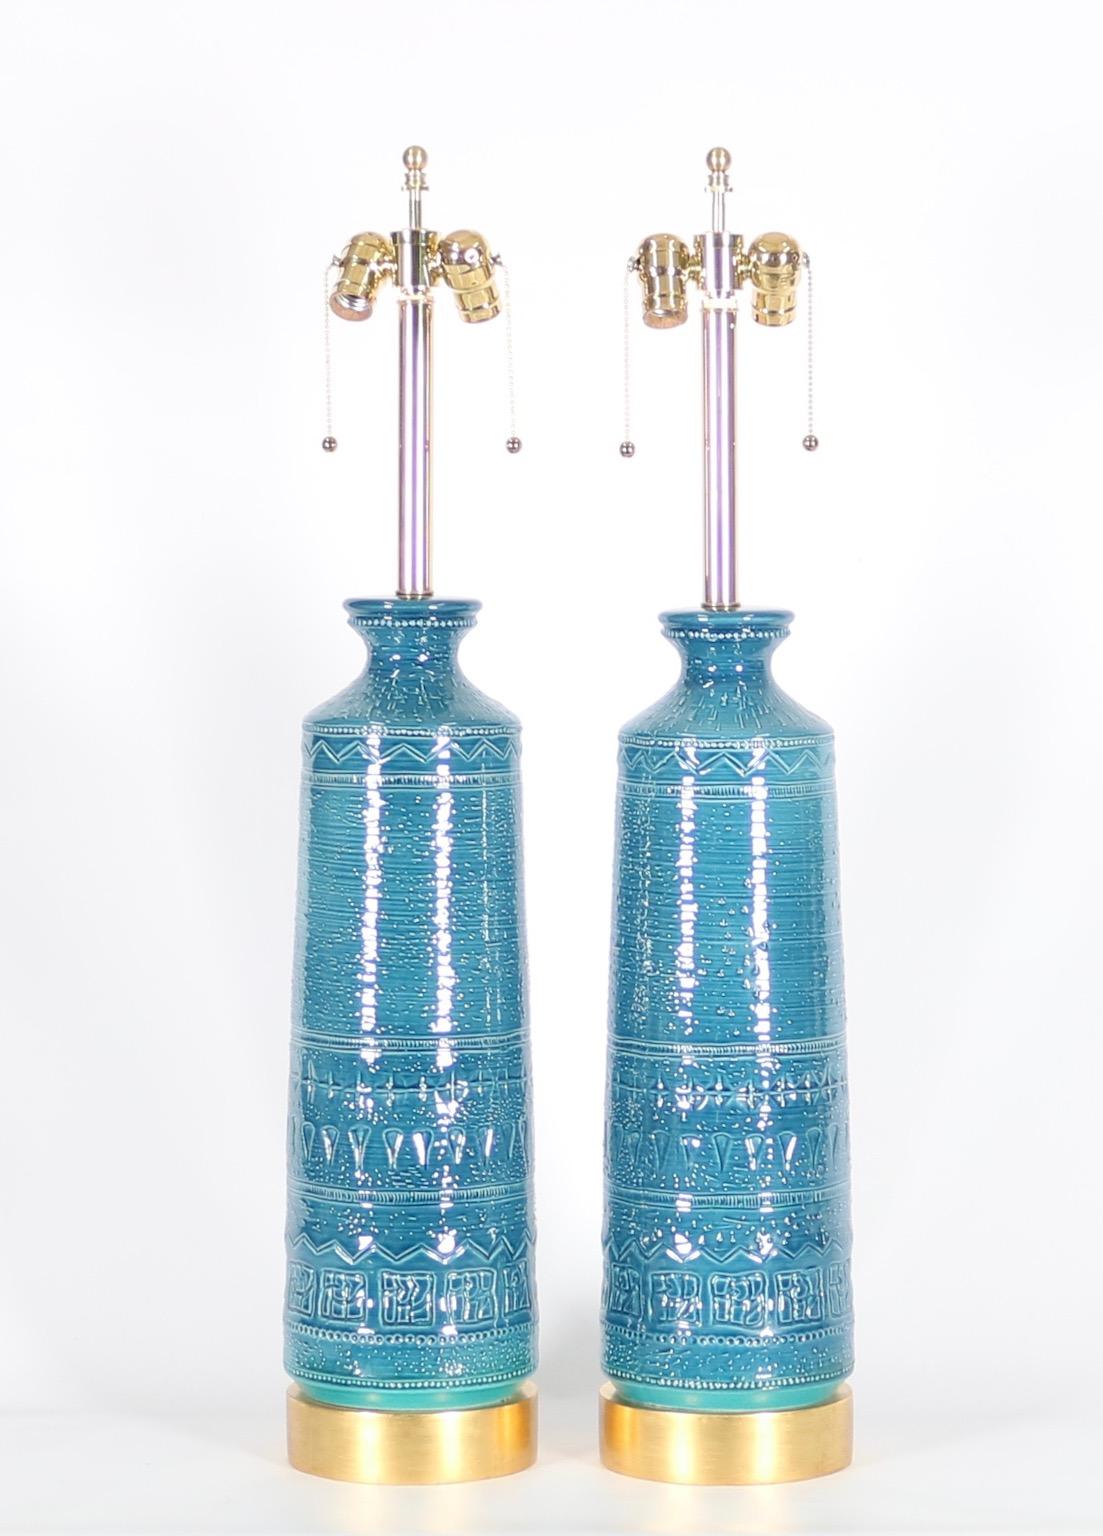 Hollywood Regency Bitossi style pair of table lamps in carved ceramic with blue & aqua glaze, mounted on gilt wooden bases. The pair was designed in the 1960s in Italy and is in great vintage condition with age-appropriate wear. Fully restored with